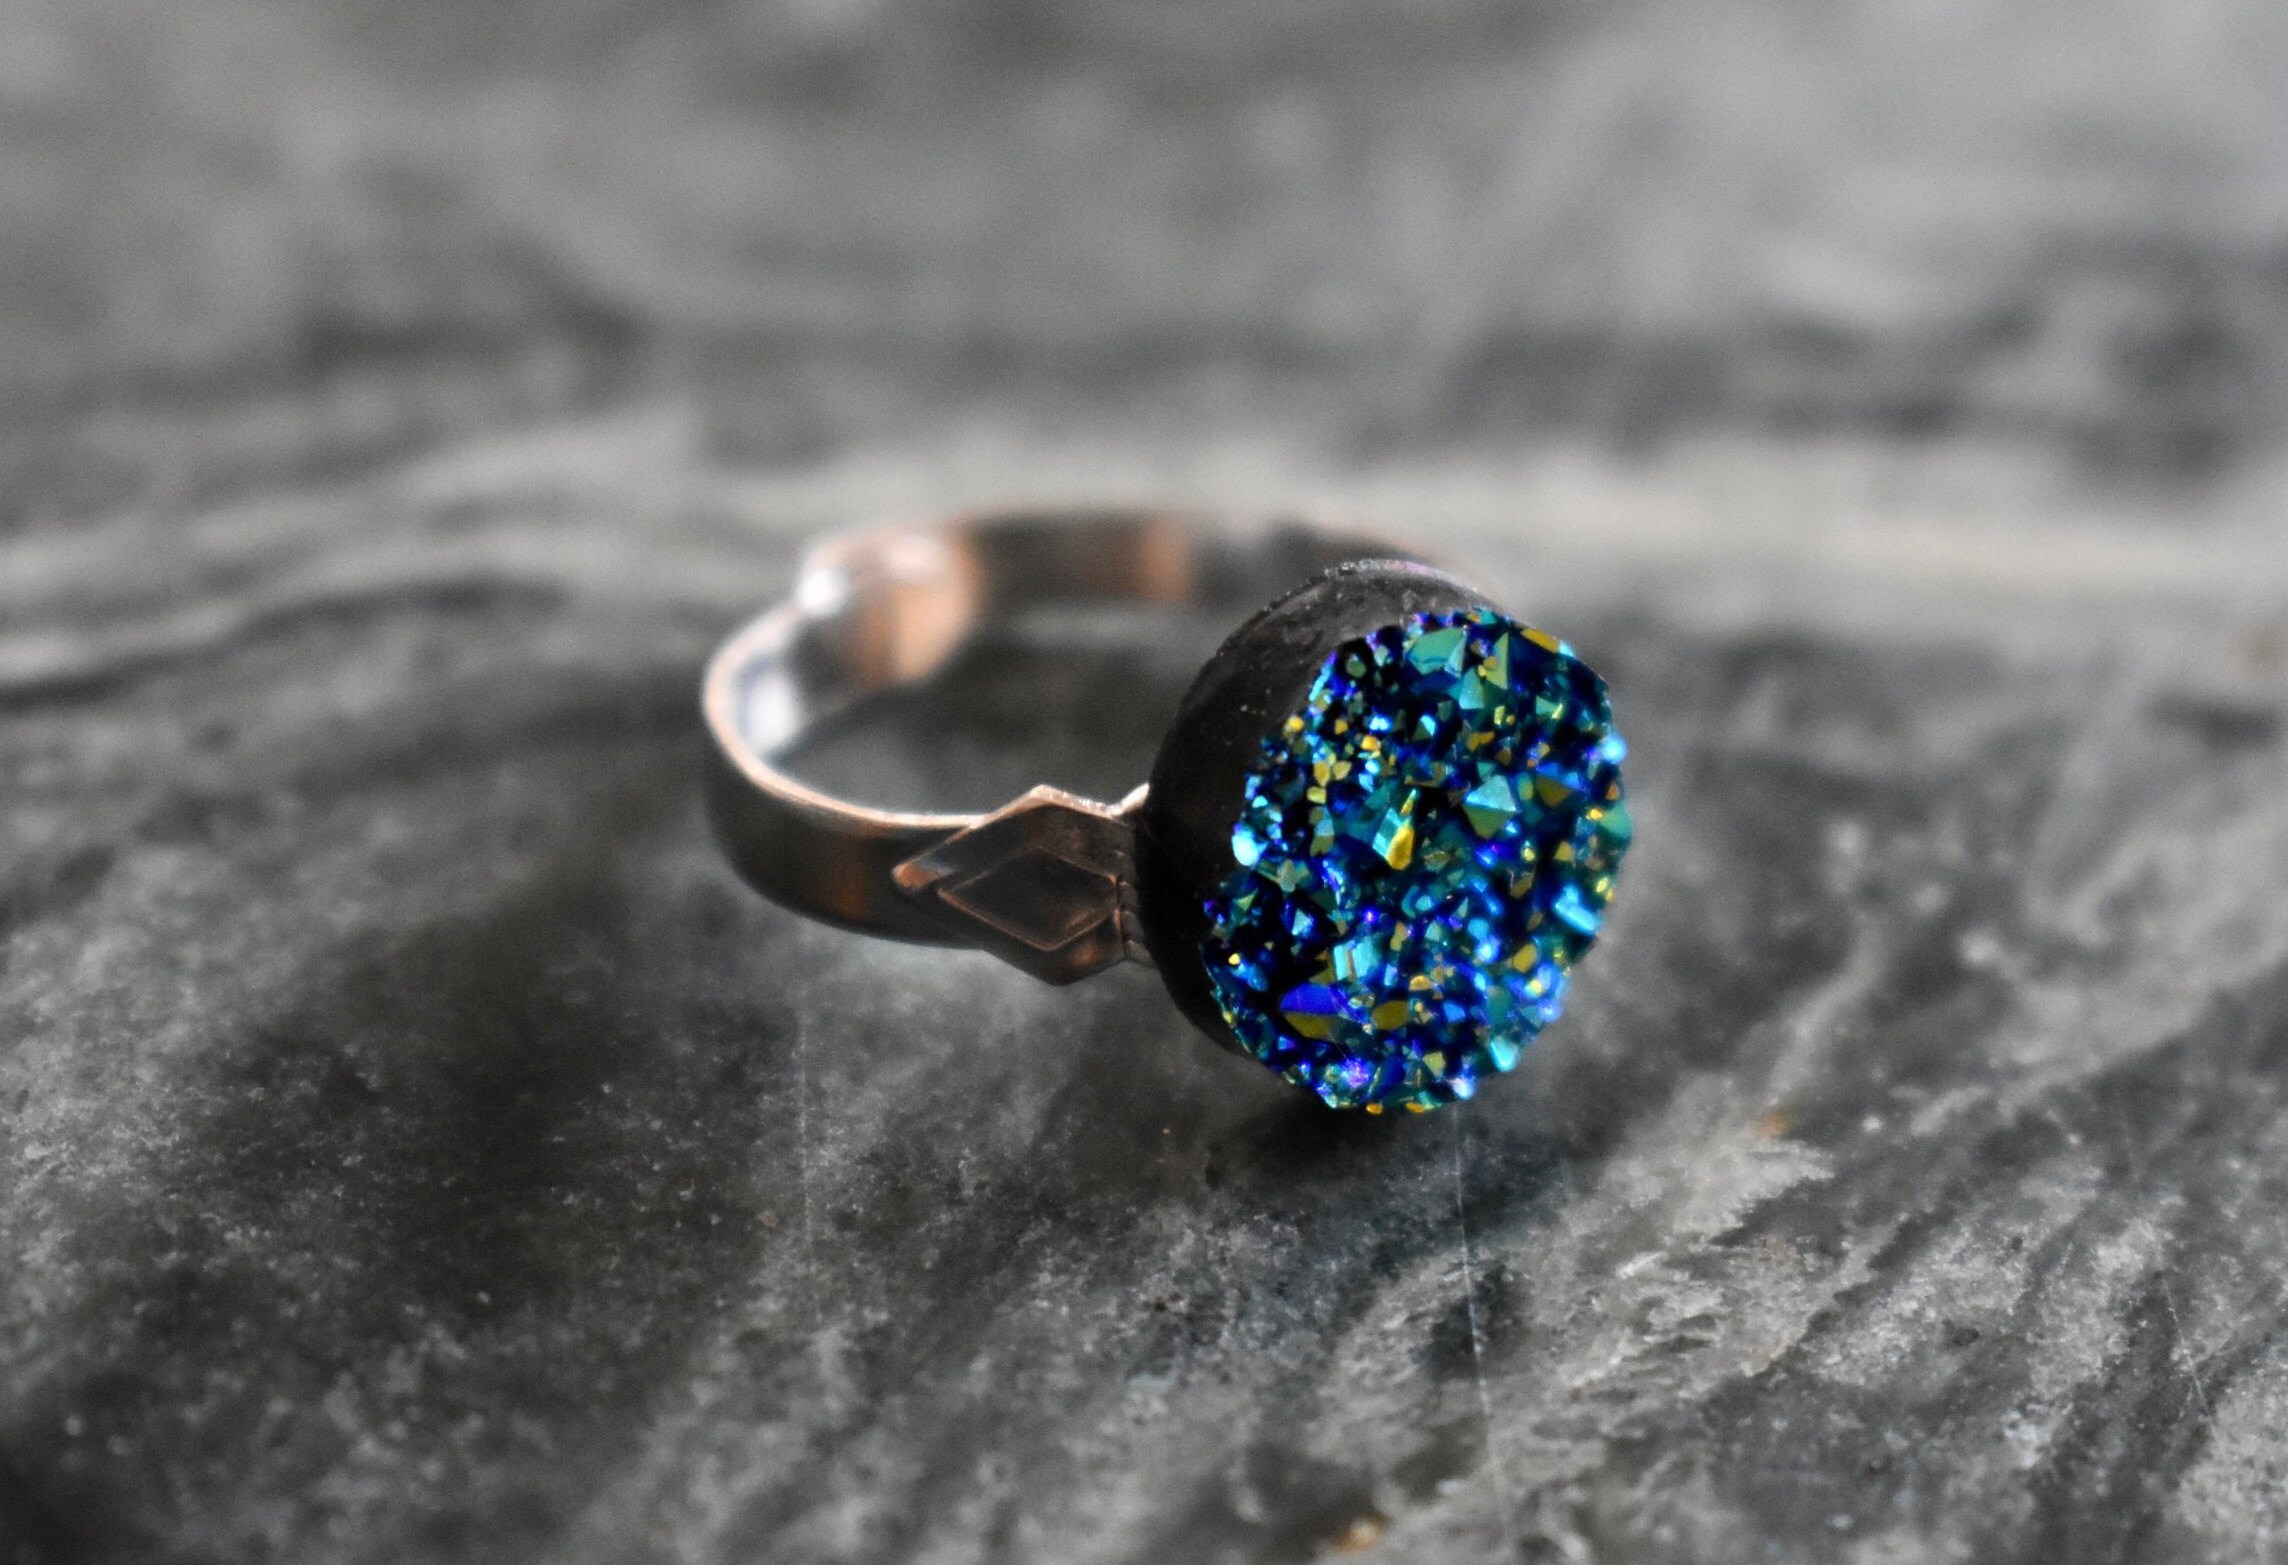 Kid's Sparkly Ring Sparkly Ring for Children Ocean Blue Faux Druzy Girl Adjustable Ring Jewelry for Children Druzy Ring for Girls